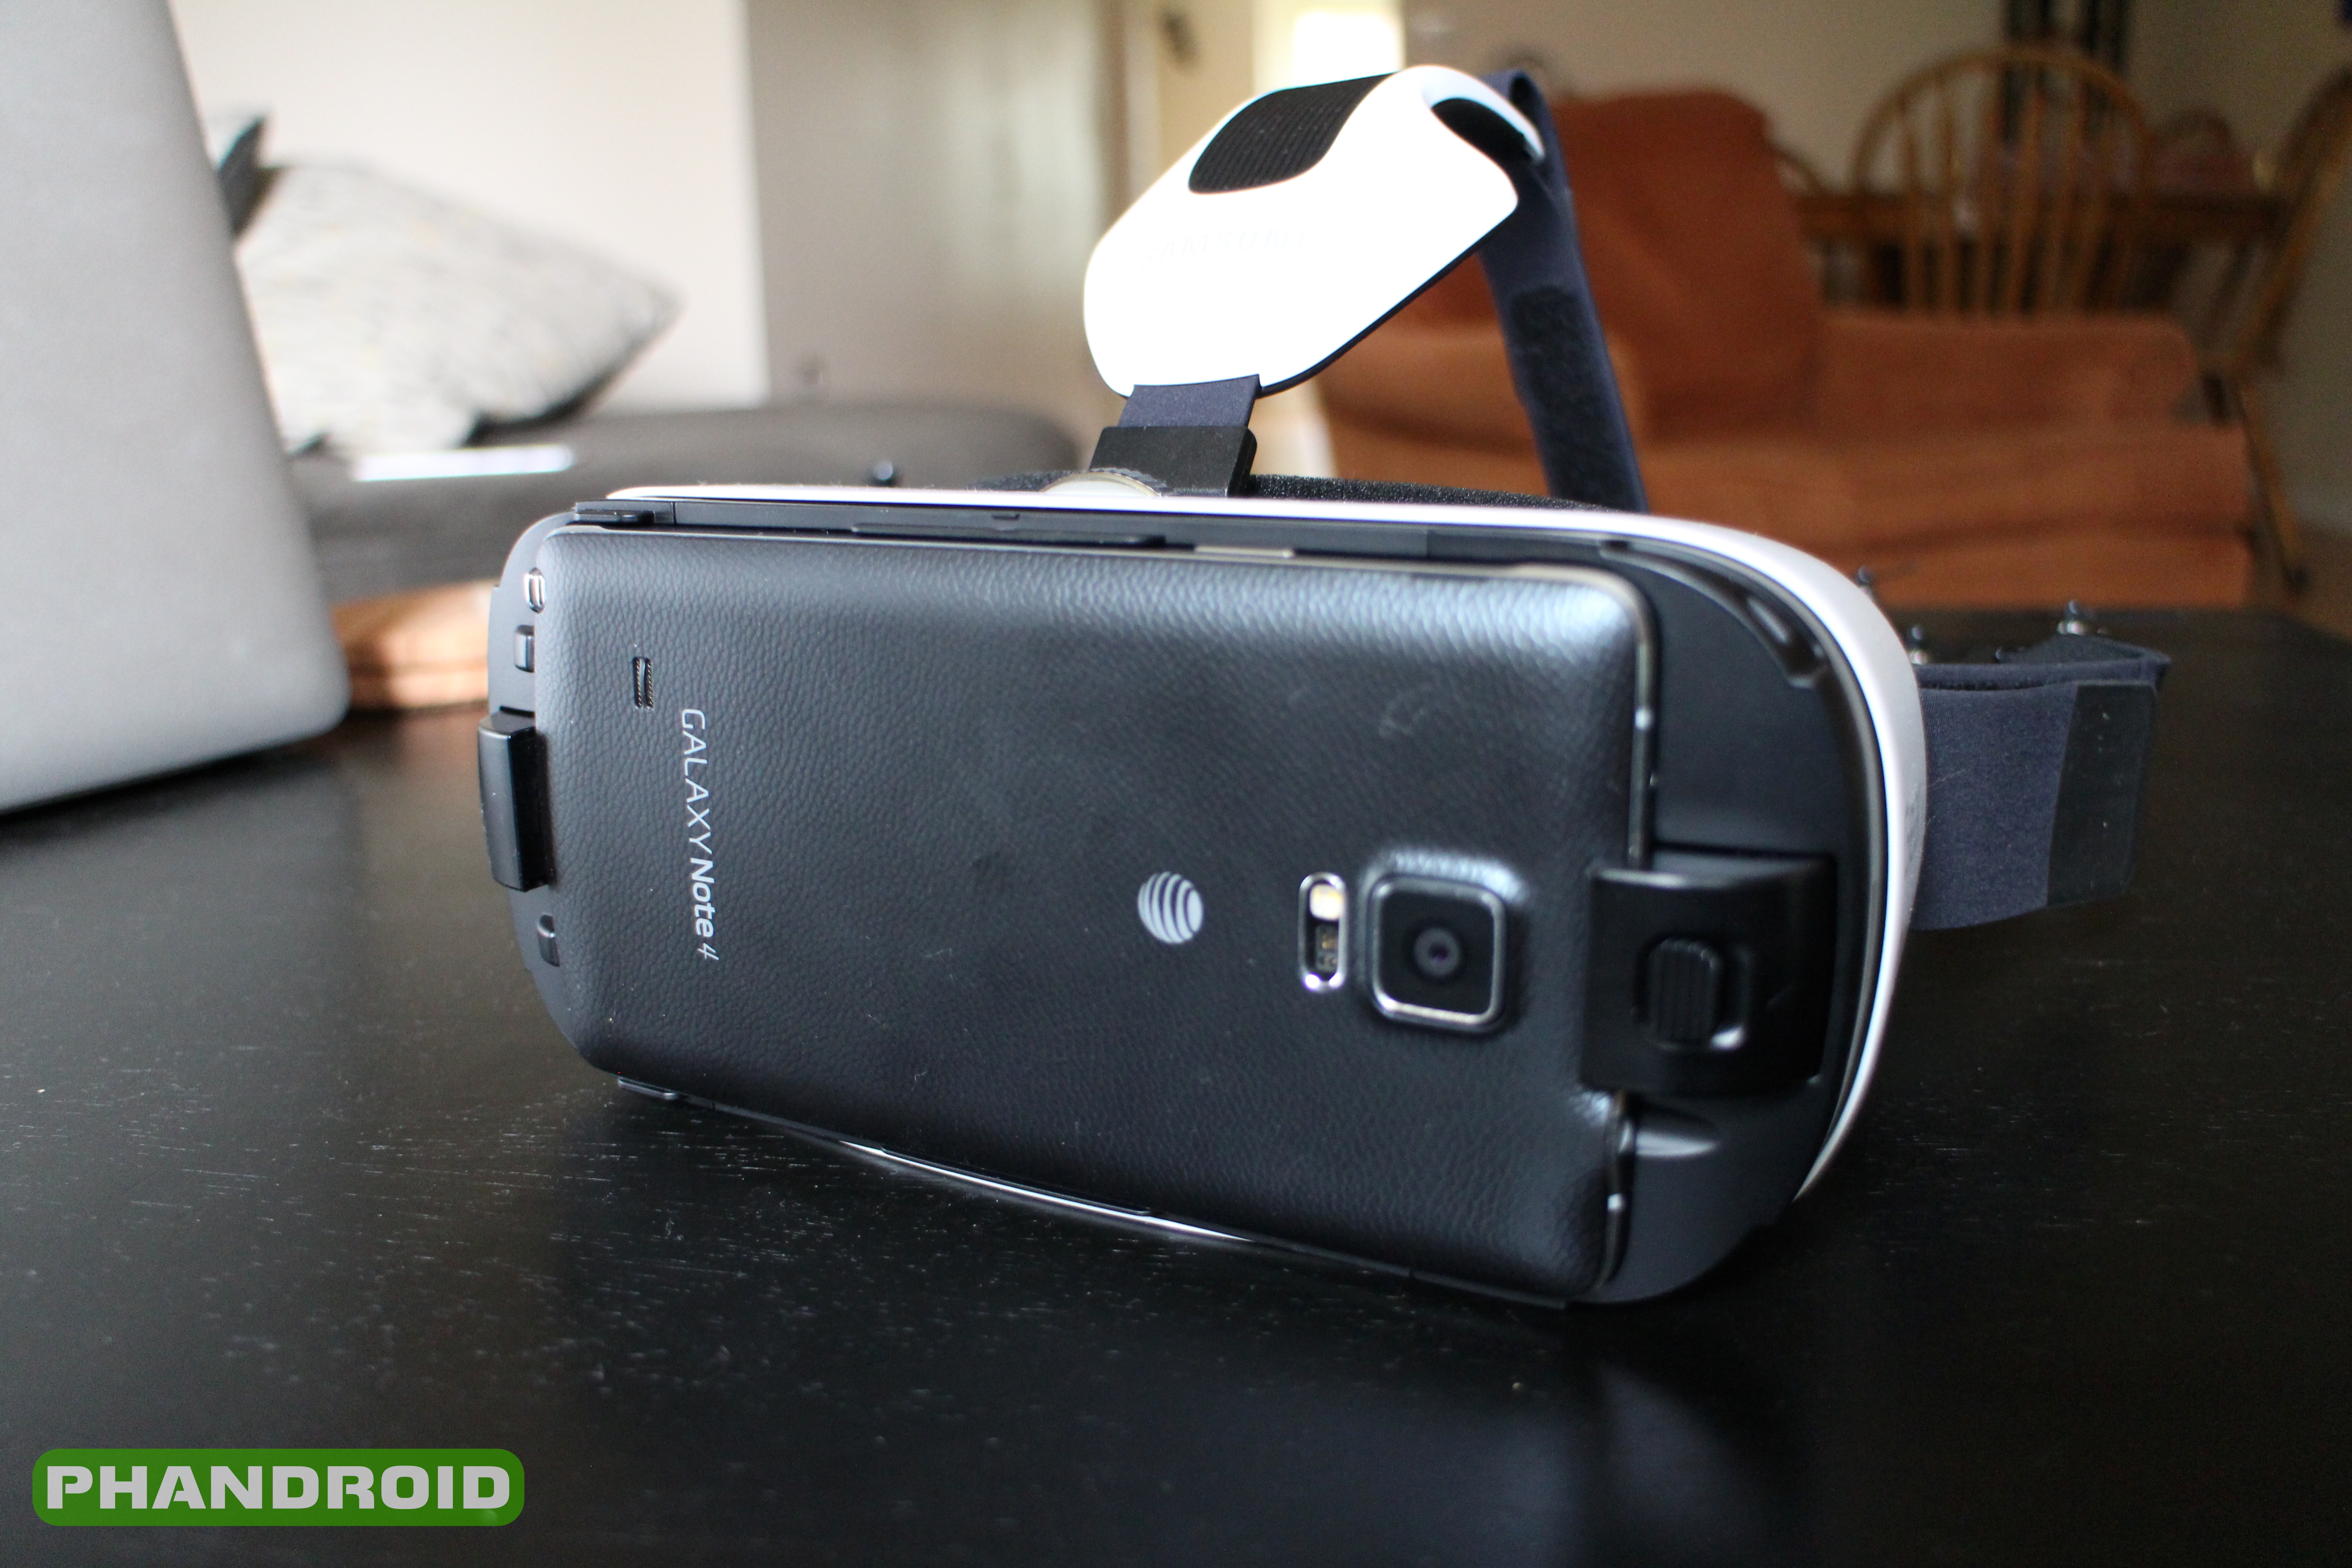 Evakuering krans I tide How to use Samsung Gear VR with unsupported smartphones – Phandroid